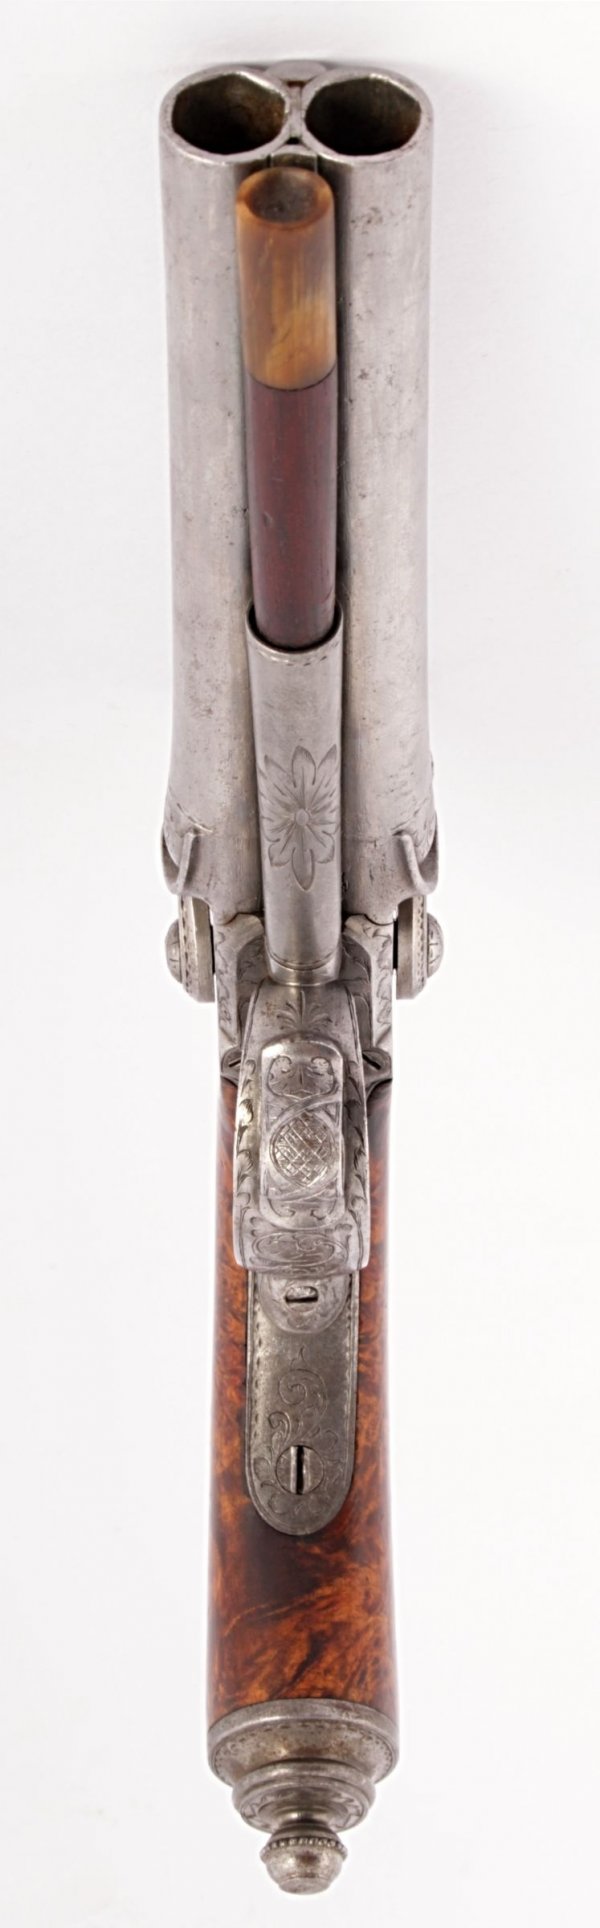 Percussion all-steel double barelled  box-lock pistol – length 210 mm, A. Nowotny, Český Brod